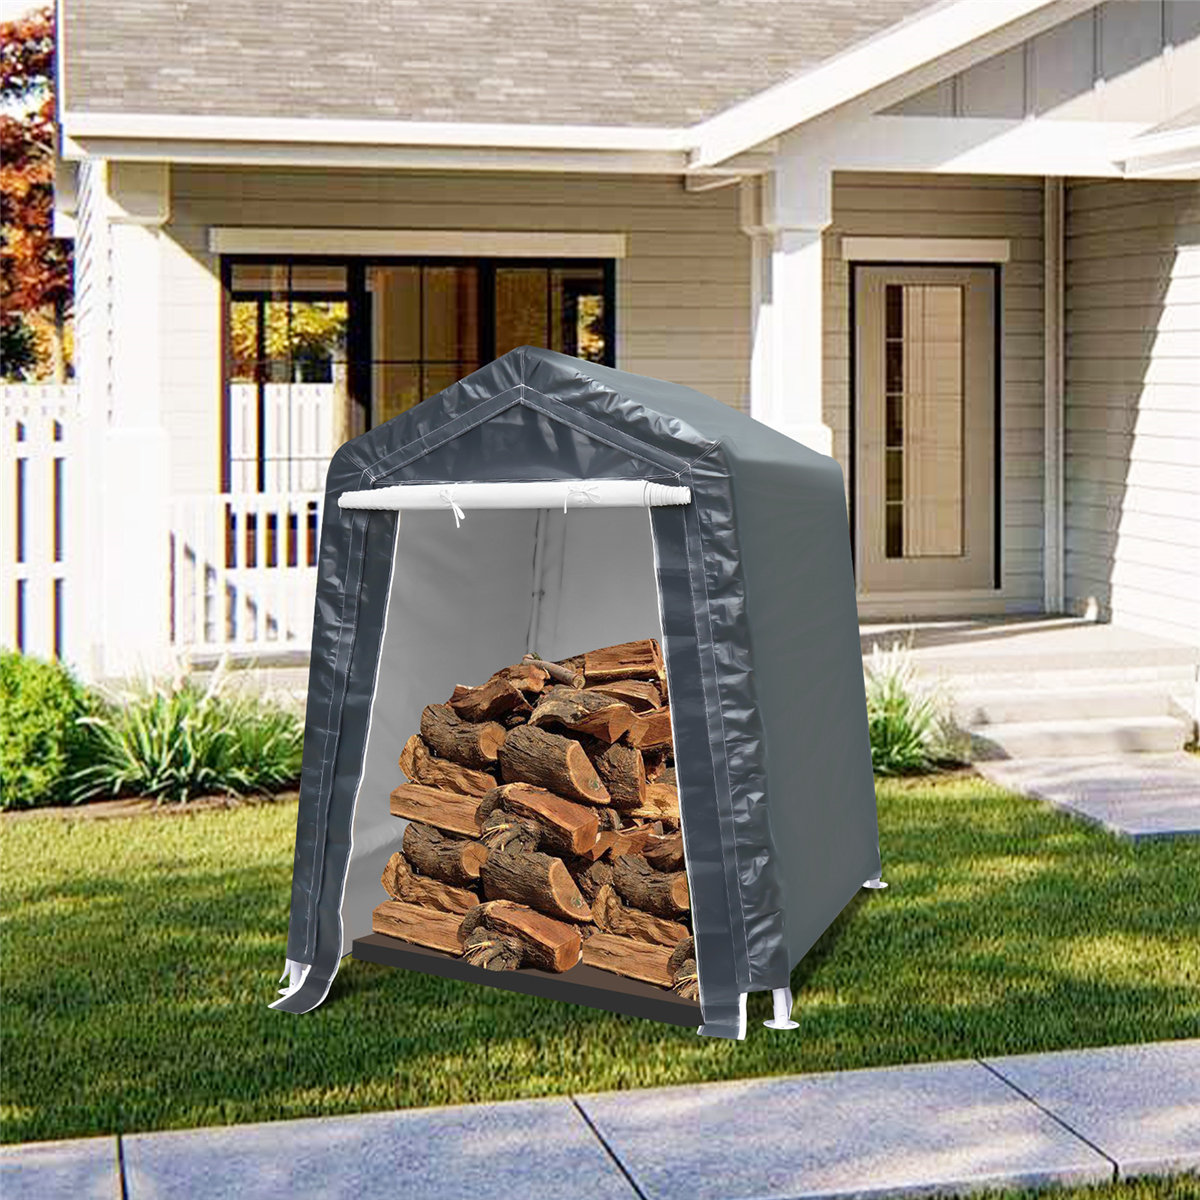 Ultimate Gray TOOCA 7x12x7.4 Ft Portable Garage Tent Kit Outdoor Carport Canopy Storage Shelter Shed with Detachable Roll-up Zipper Door for Motorcycle Gardening Vehicle ATV Storage 